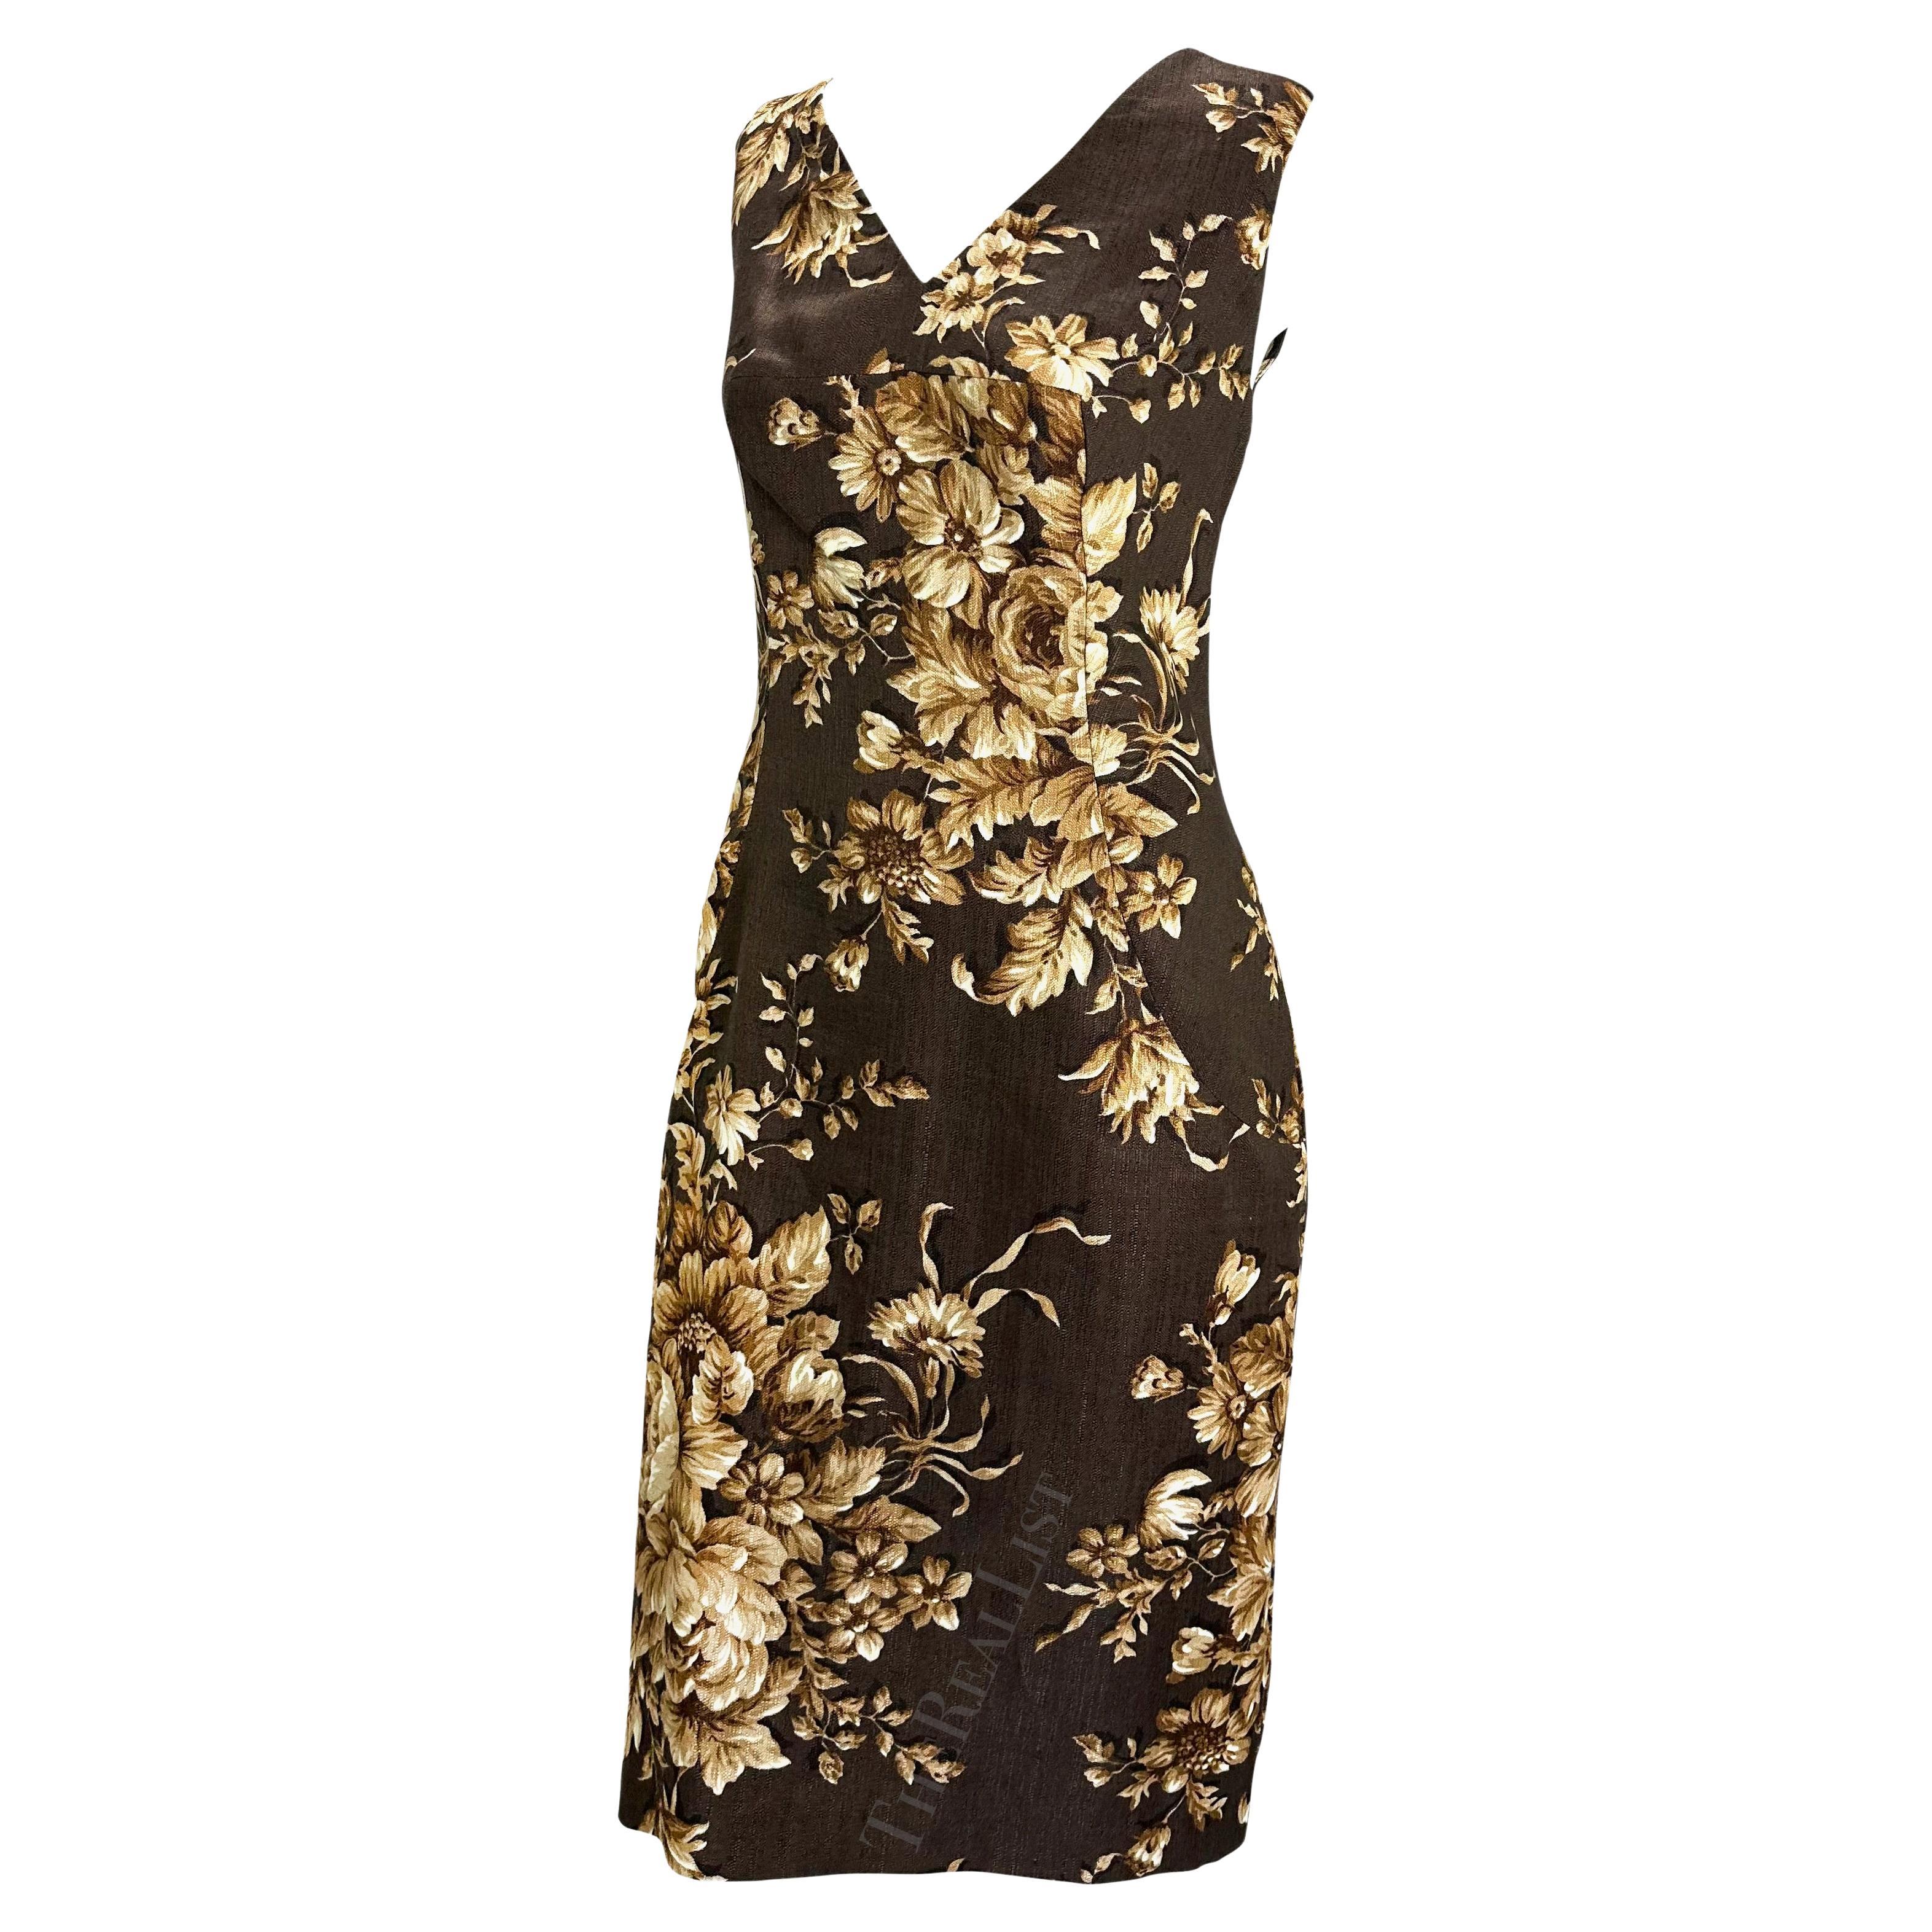 Presenting a fabulous brown floral Dolce and Gabbana sleeveless dress. From the Spring/Summer 1997 collection, this dress features a floral print that was heavily used on the season’s runway.

Approximate measurements:
Size -  removed
Bust: 34 -